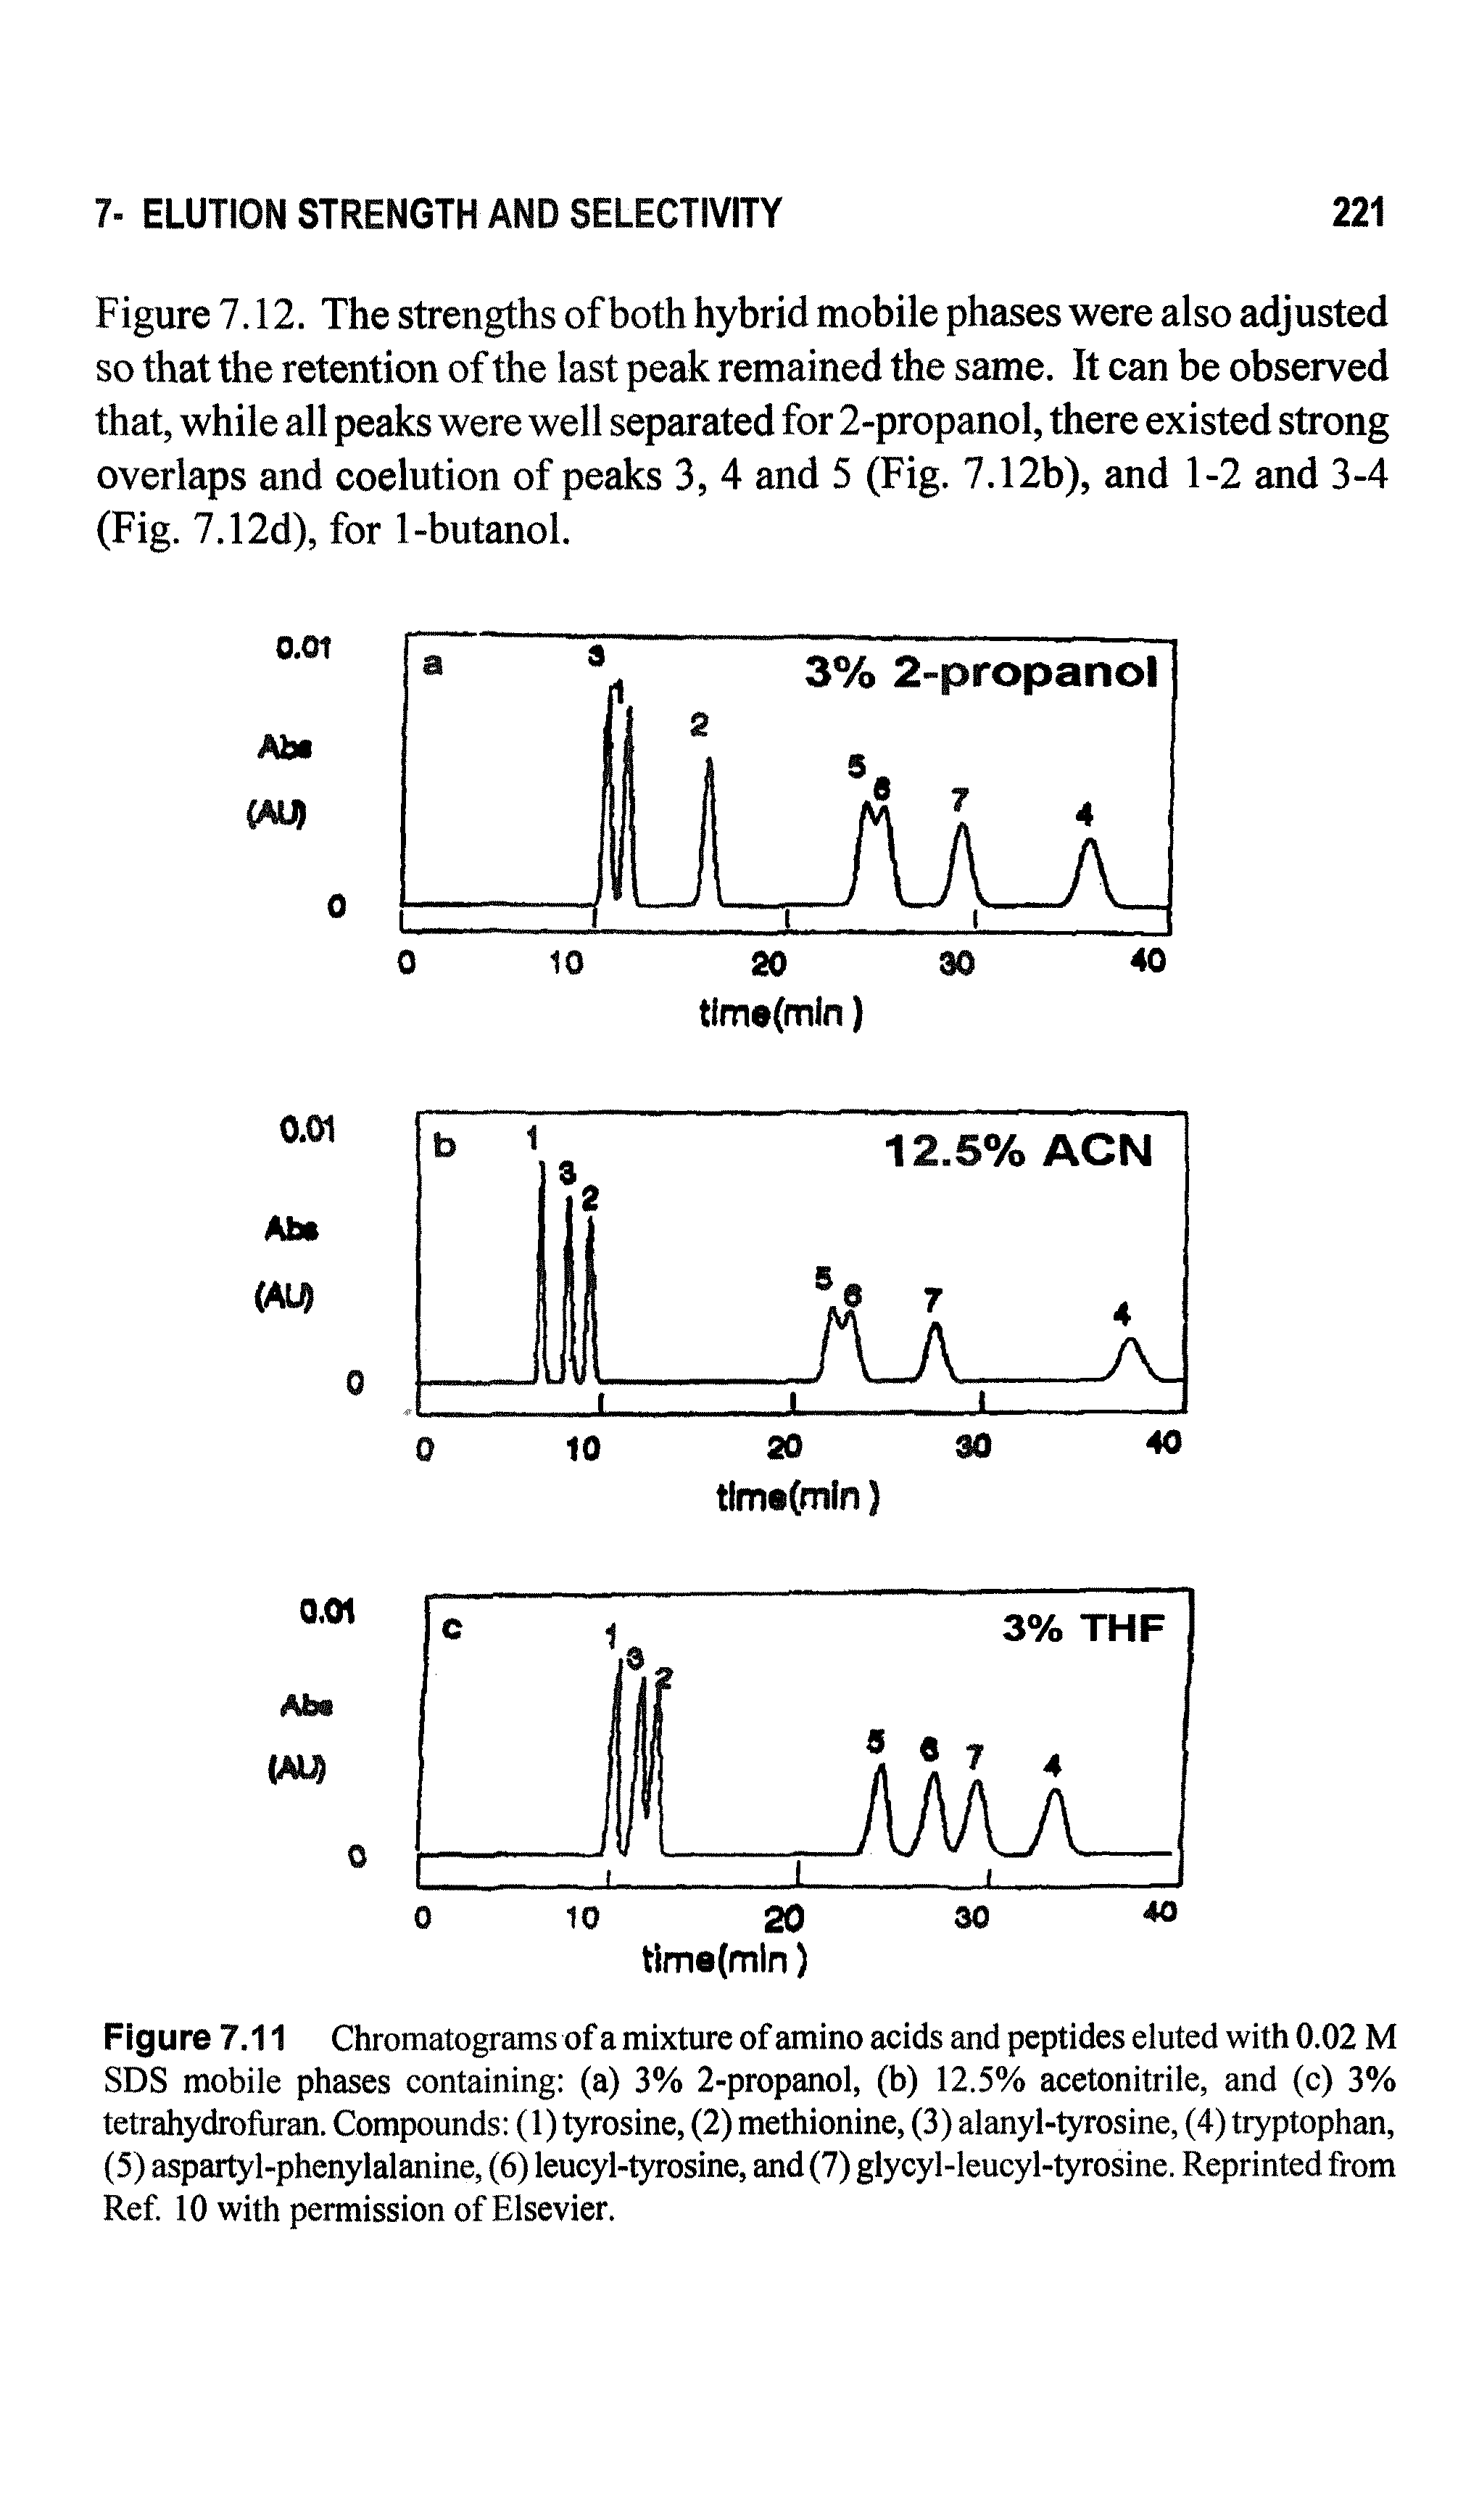 Figure 7.11 Chromatograms of a mixture of amino acids and peptides eluted with 0.02 M SDS mobile phases containing (a) 3% 2-propanol, (b) 12.5% acetonitrile, and (c) 3% tetrahydrofuran. Compounds (1) tyrosine, (2) methionine, (3) alanyi-tyrosine, (4) tryptophan, (5) aspartyl-phenylalanine, (6) leucyl-tyrosine, and (7) glycyl-leucyl-tyrosine. Reprinted from Ref 10 with permission of Elsevier.